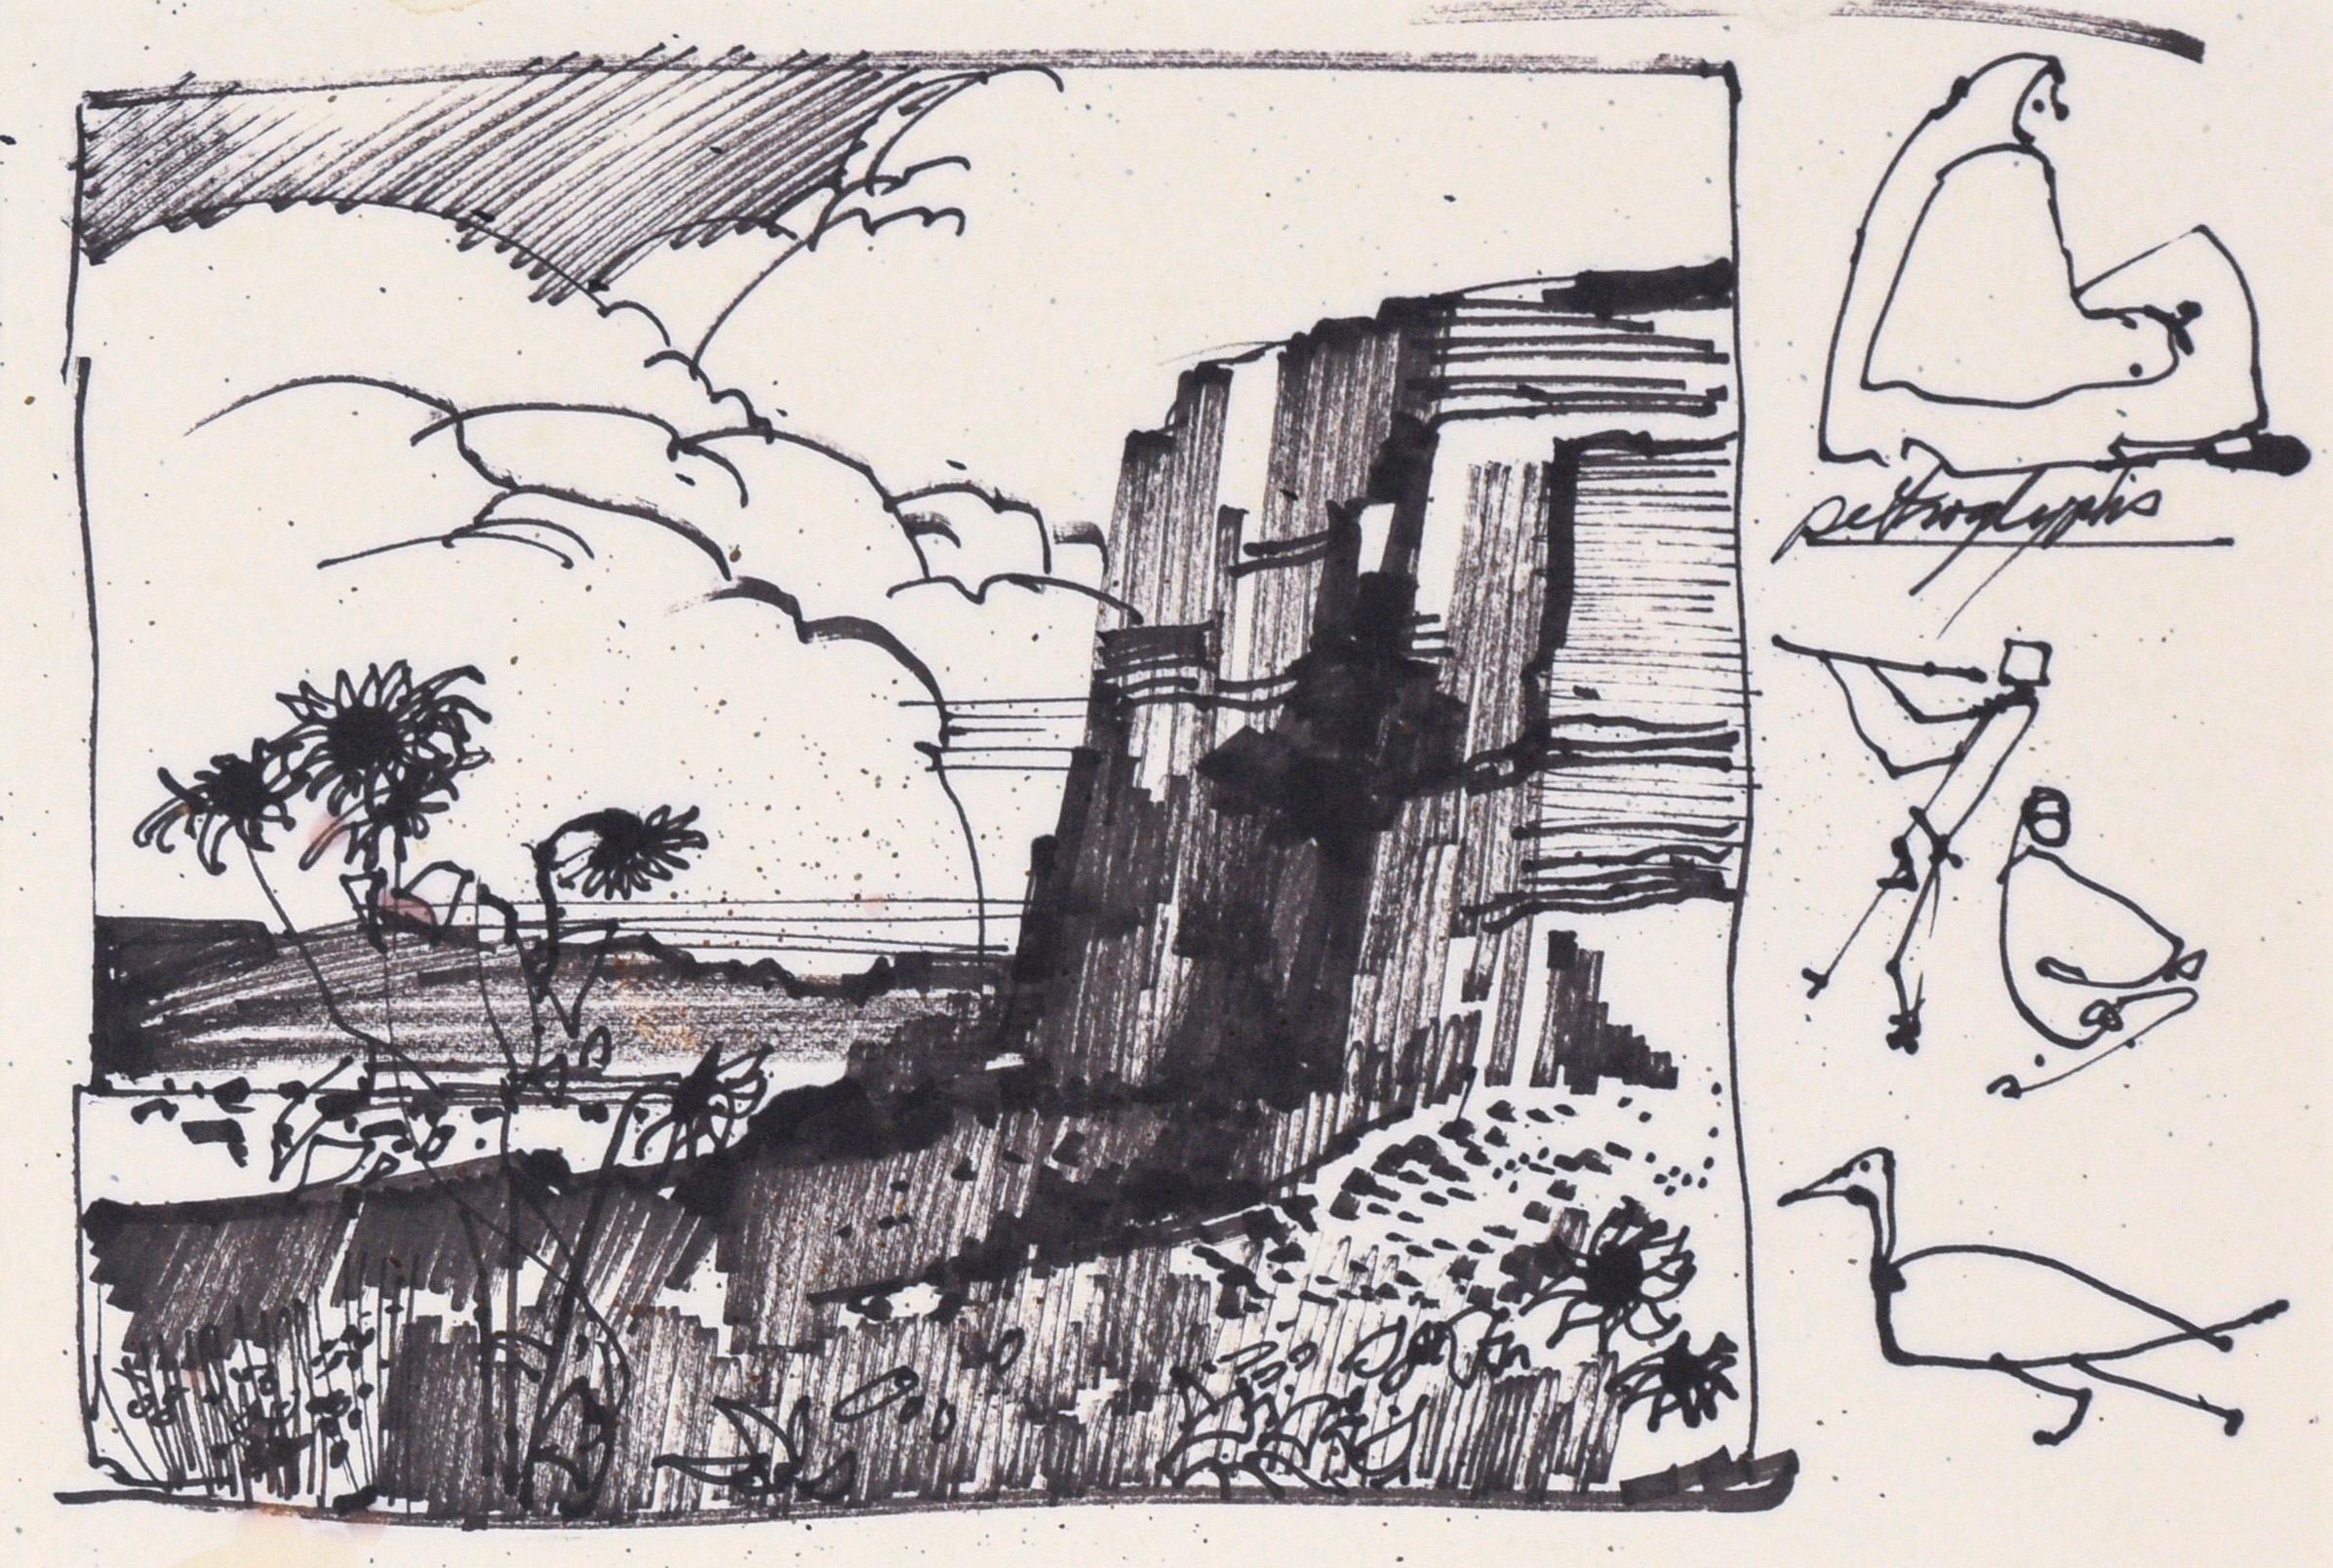 Desert Sunflowers & Petroglyphs - Line Drawing Landscape in Ink on Paper - Art by Laurence Sisson